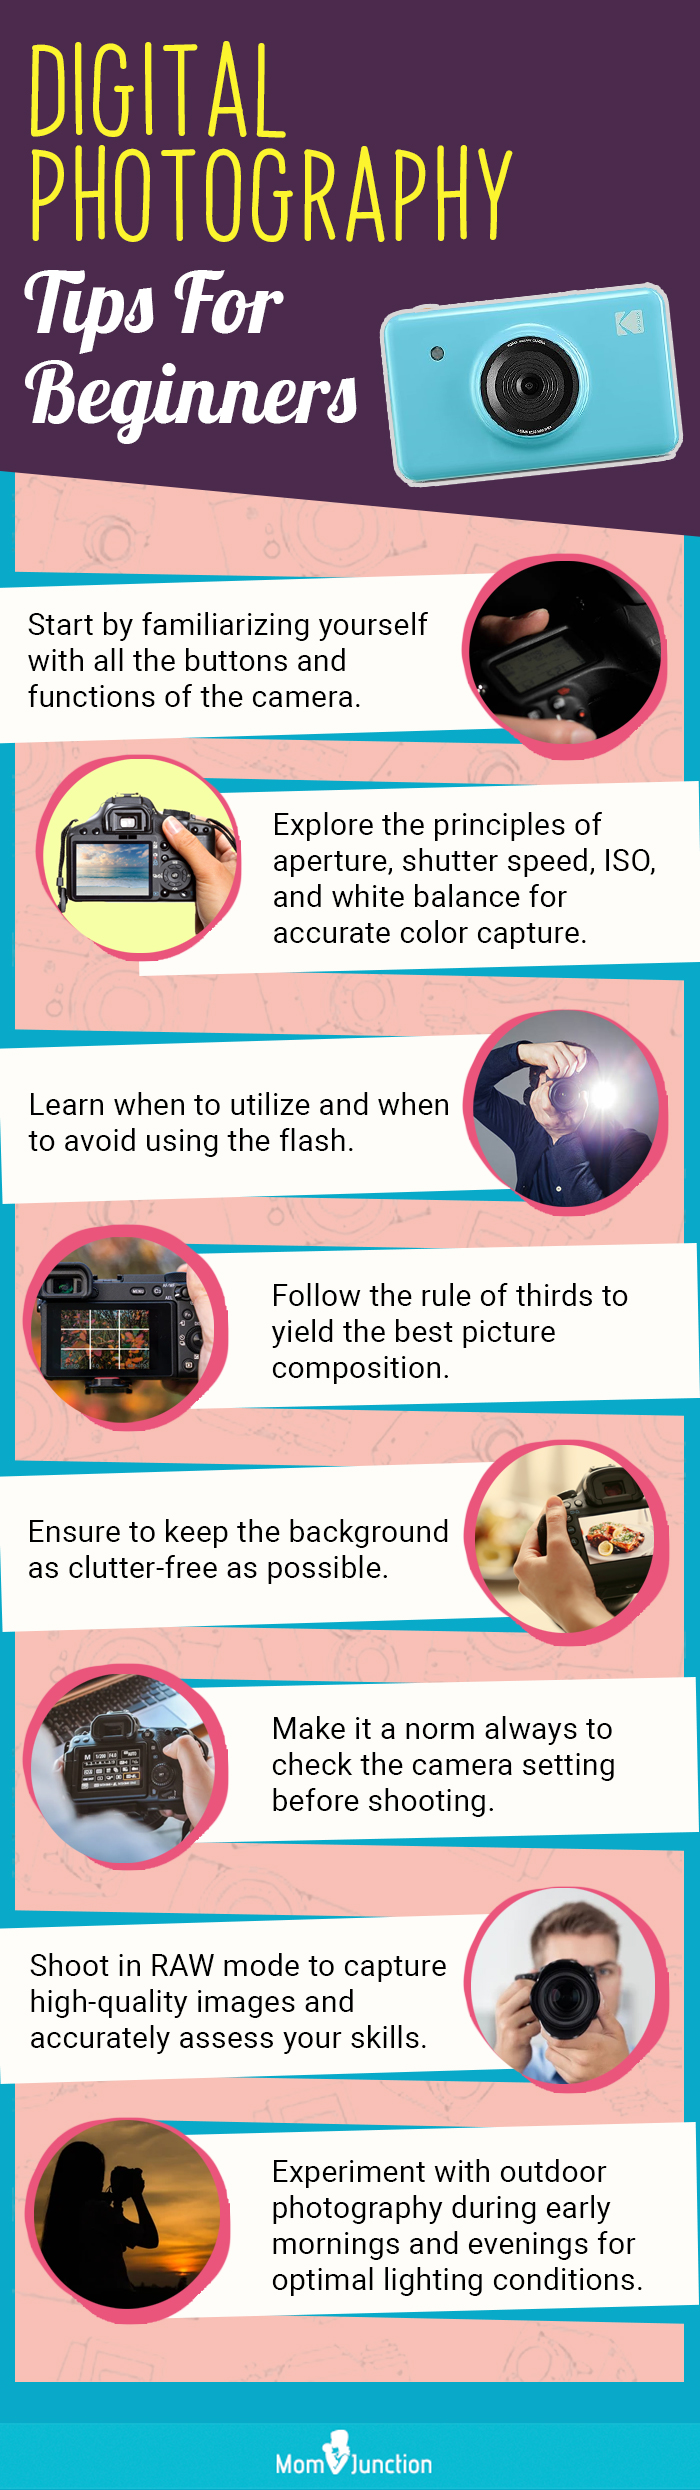 Digital Photography Tips For Beginners(infographic)